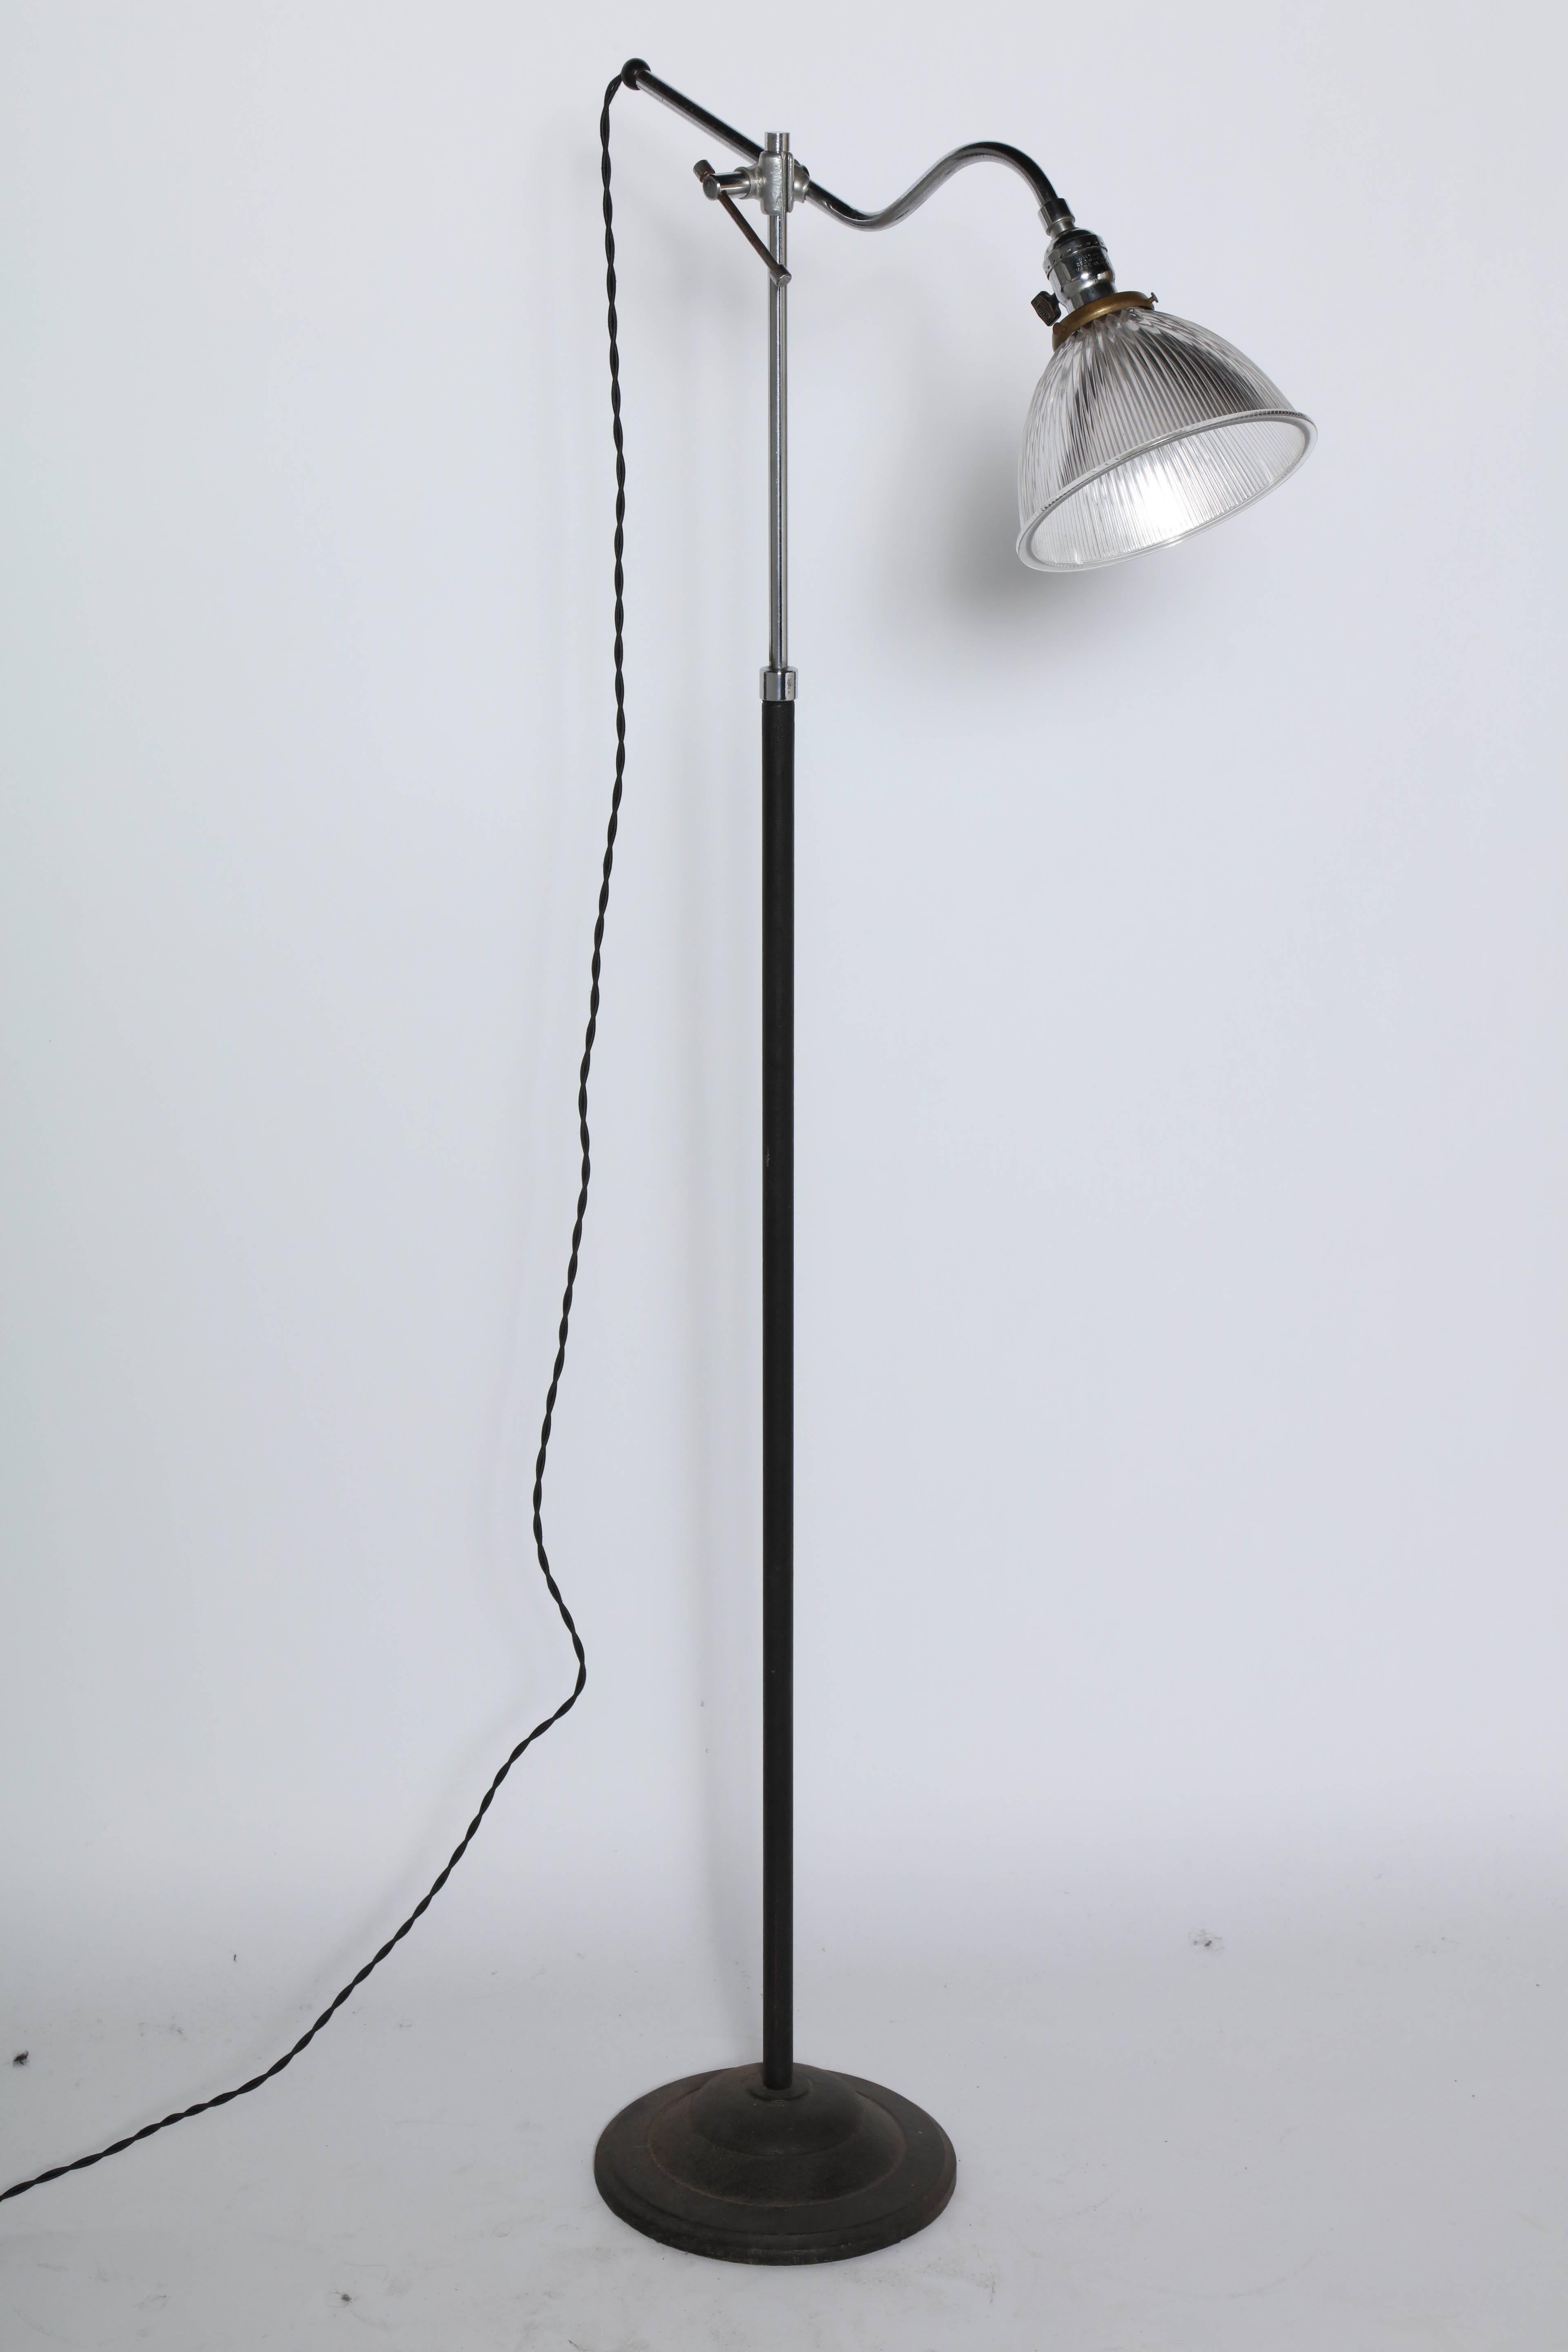 Circa 1930 Cast Iron & Chrome Articulating Floor Lamp with Holophane Shade In Good Condition For Sale In Bainbridge, NY